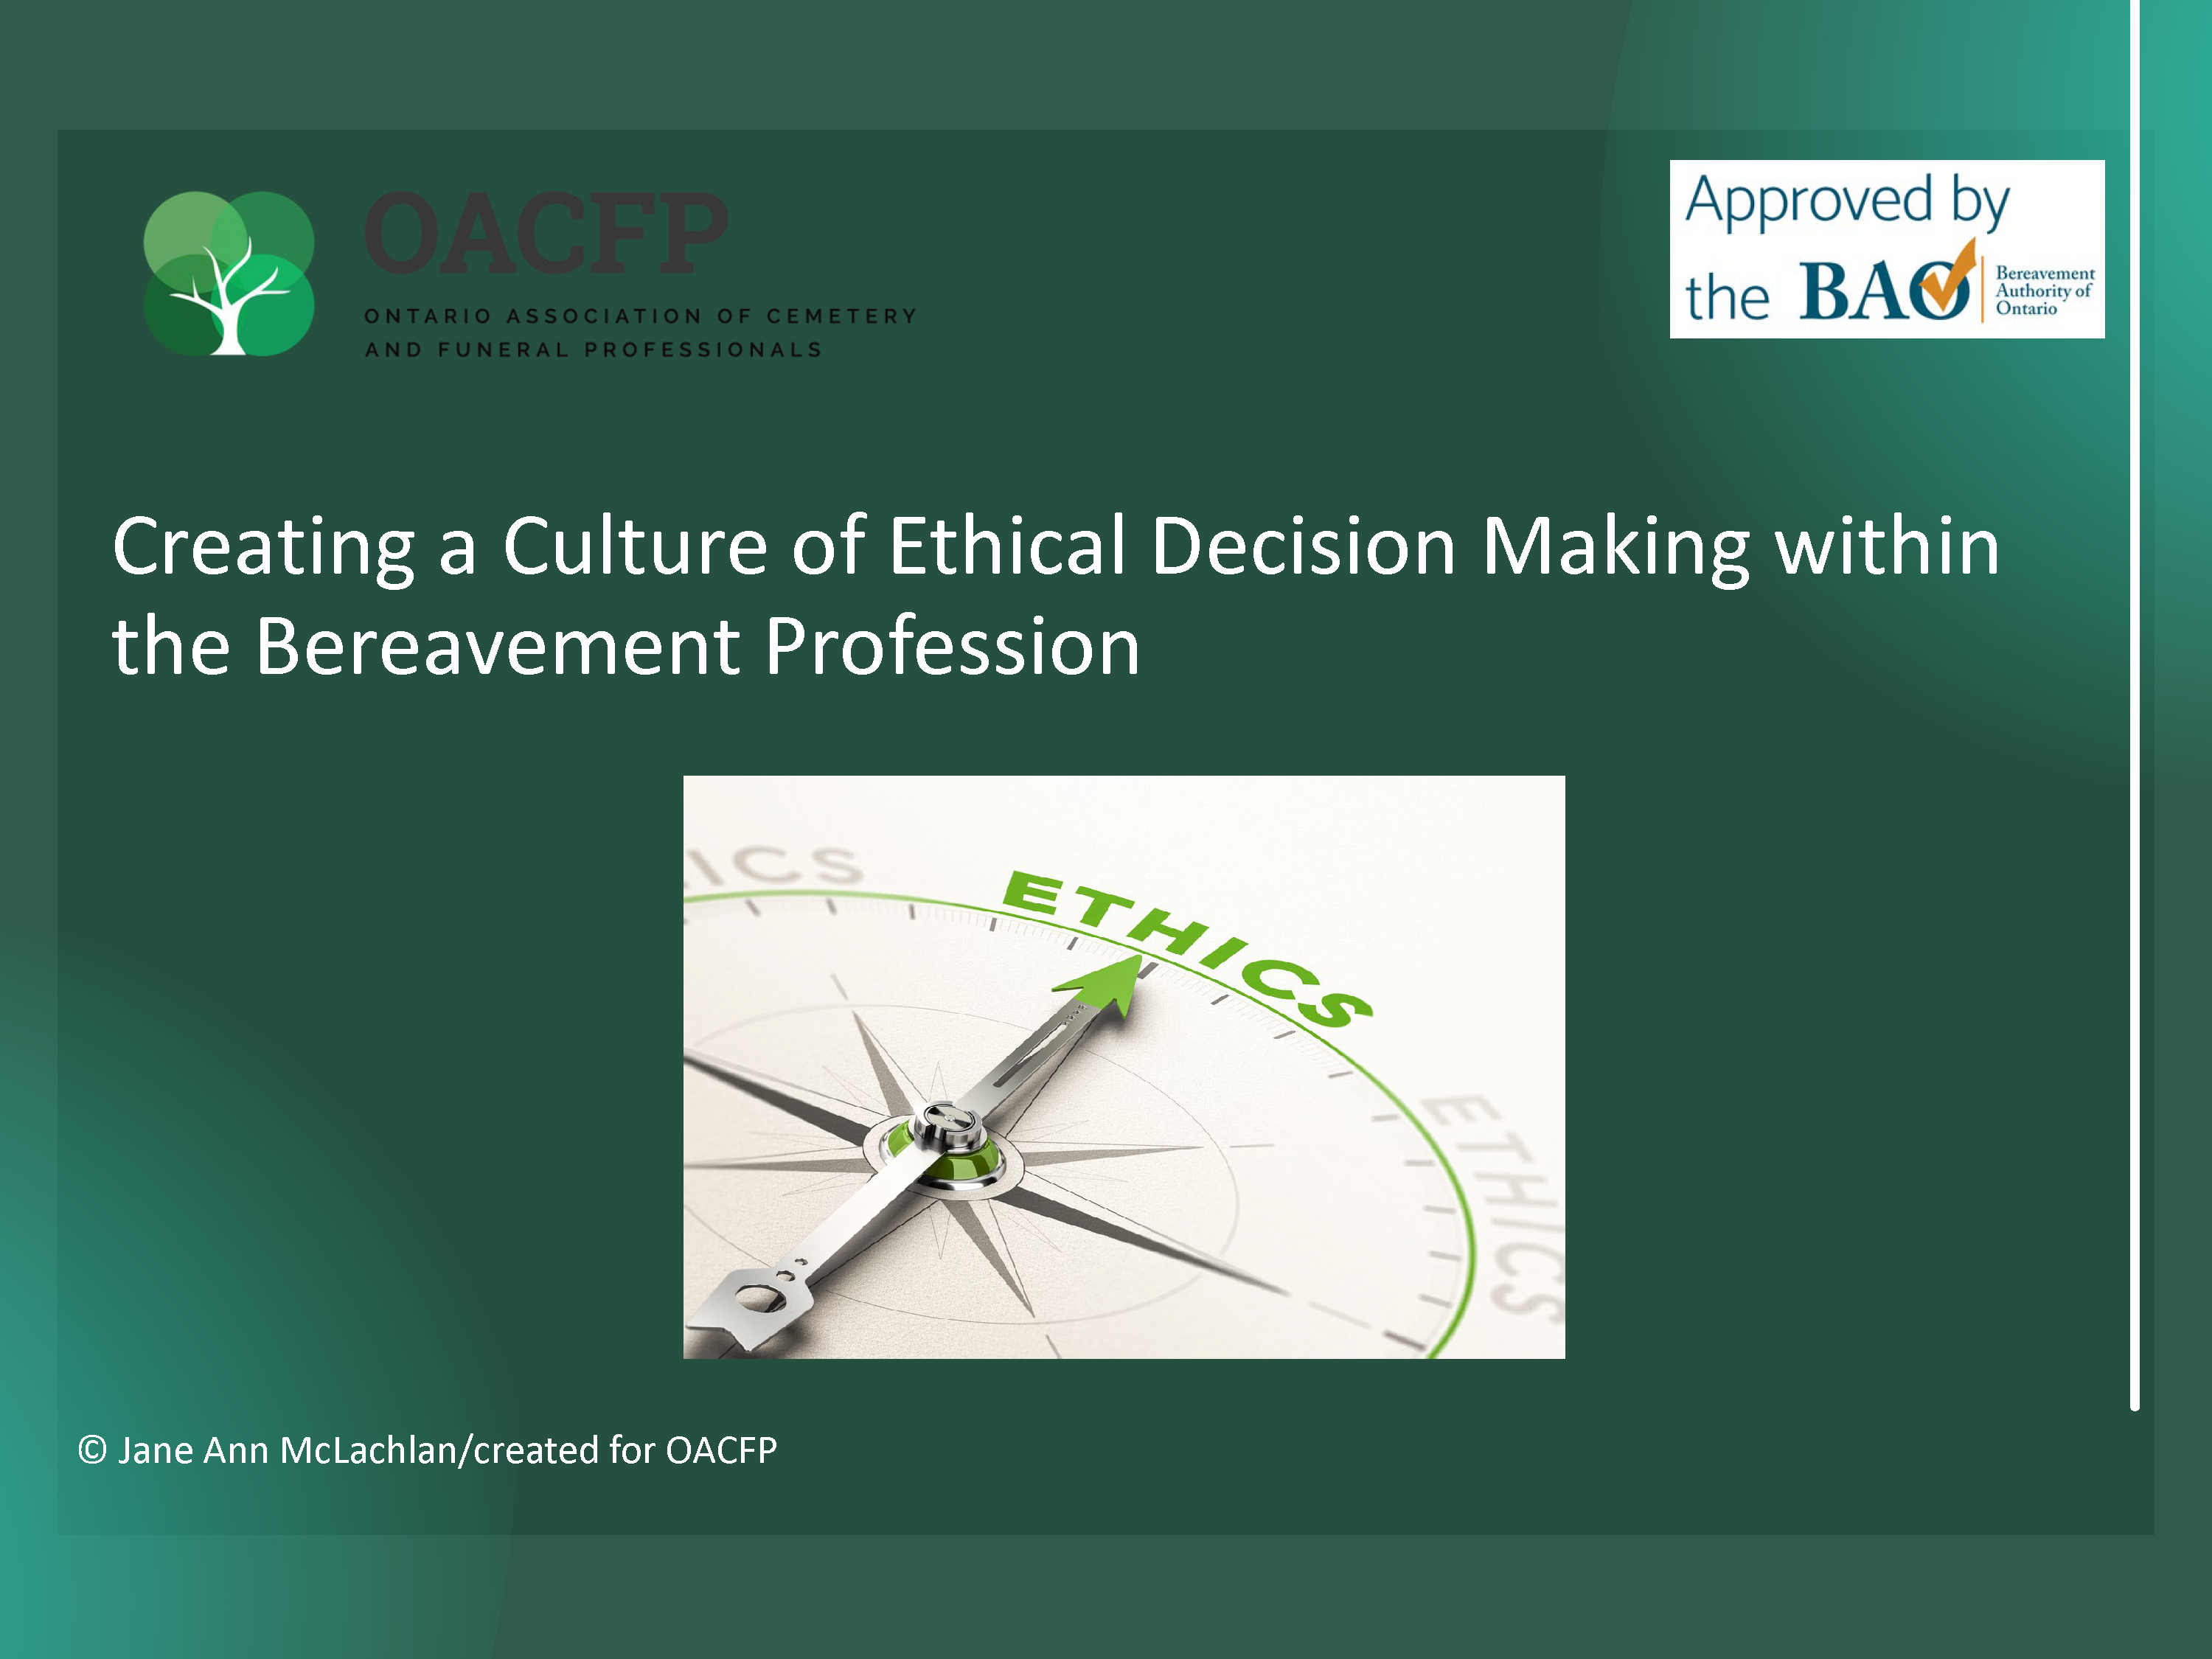 Creating A Climate of Ethical Choices in the Bereavement Profession